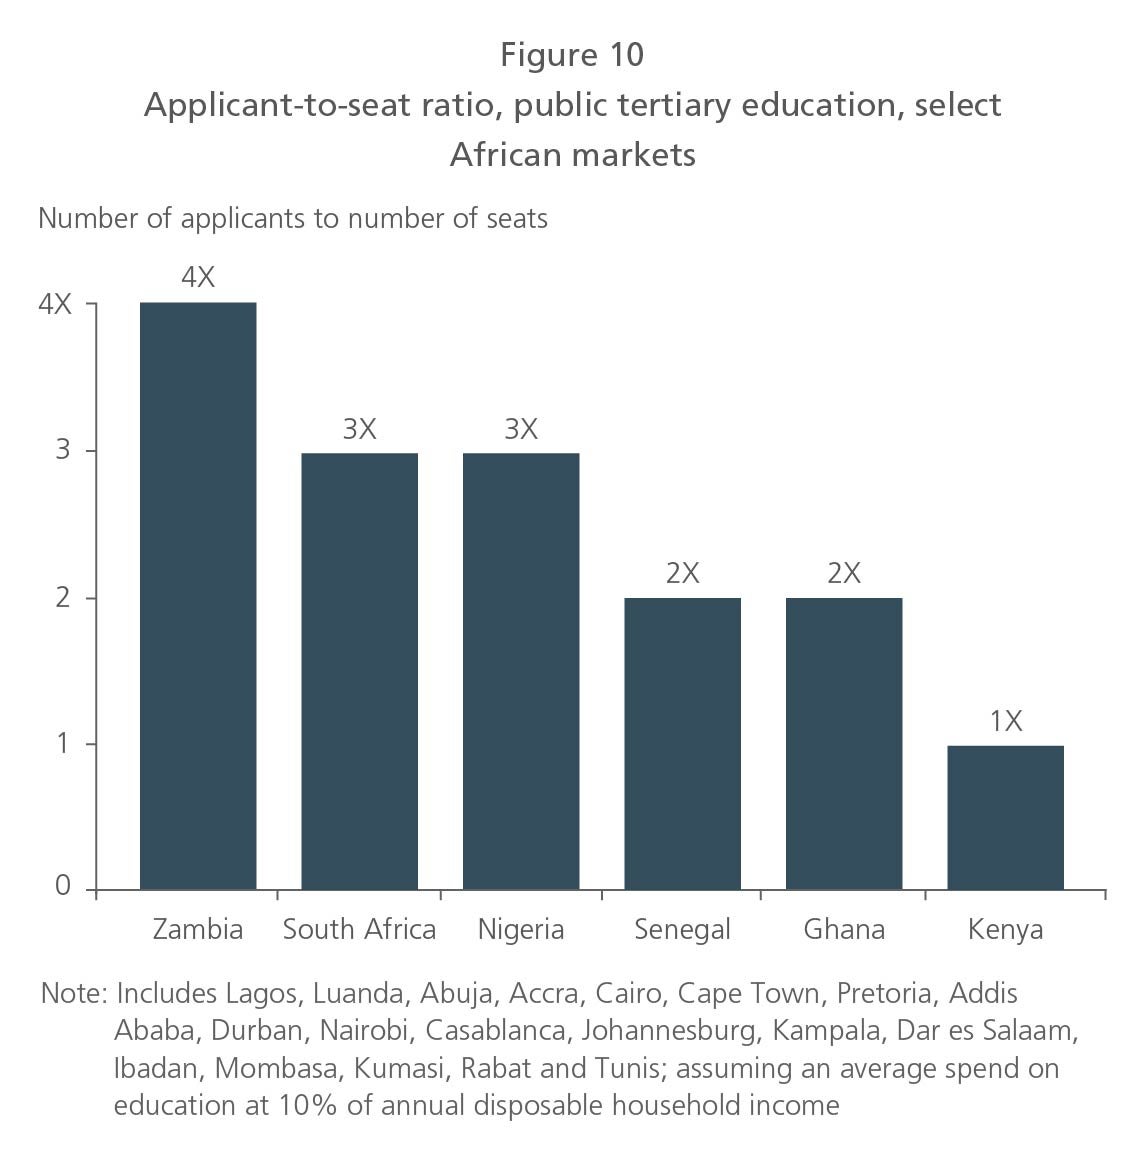 Applicant-to-seat ratio, public tertiary education, select African markets